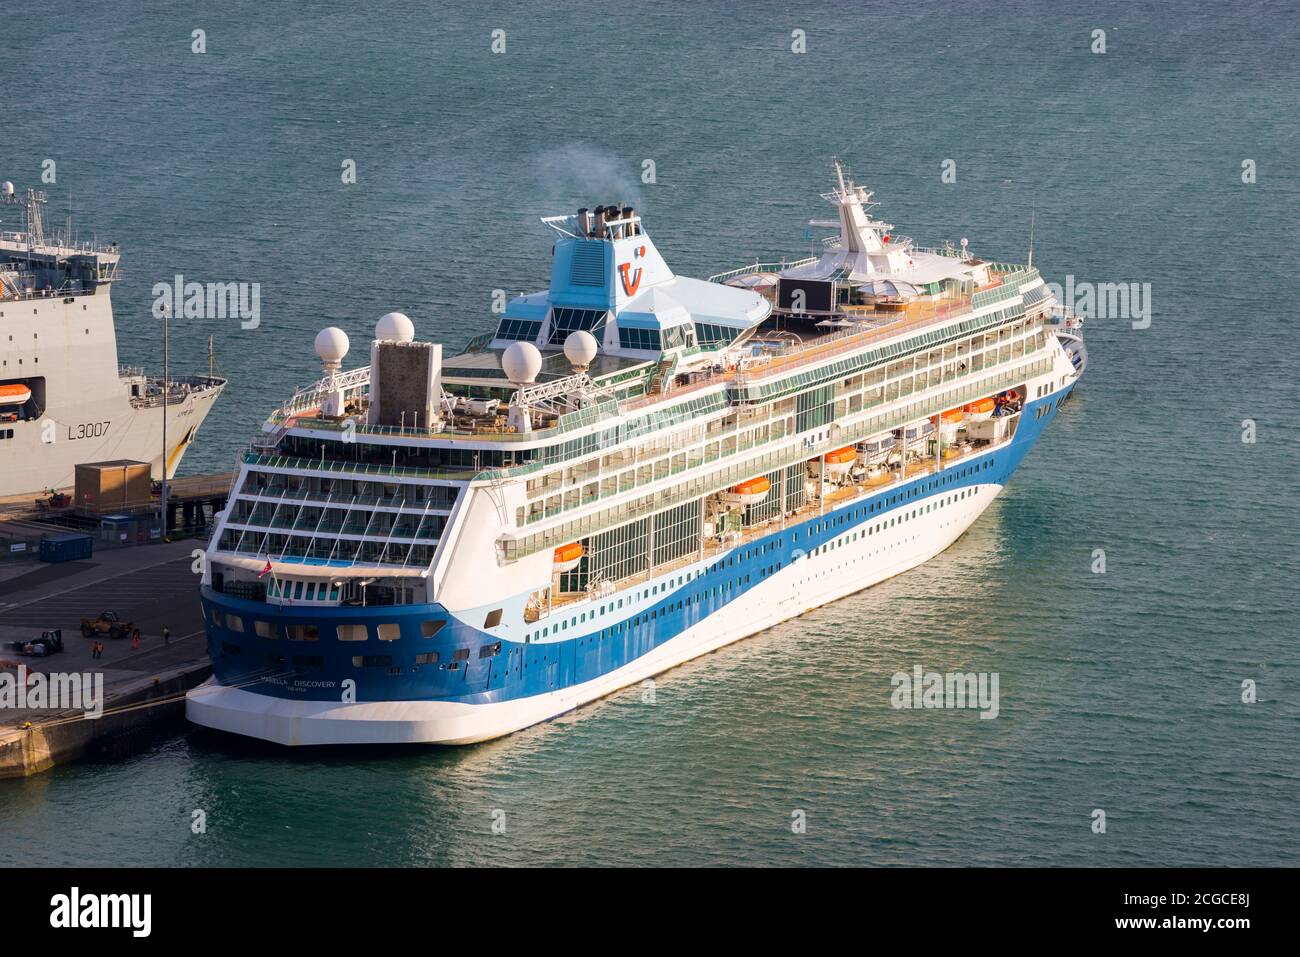 Portland, Dorset, UK.  10th September 2020.  The empty Tui cruise ship Marella Discovery docked at Portland Port in Dorset during the cruising shutdown due to Covid-19.  Picture Credit: Graham Hunt/Alamy Live News Stock Photo